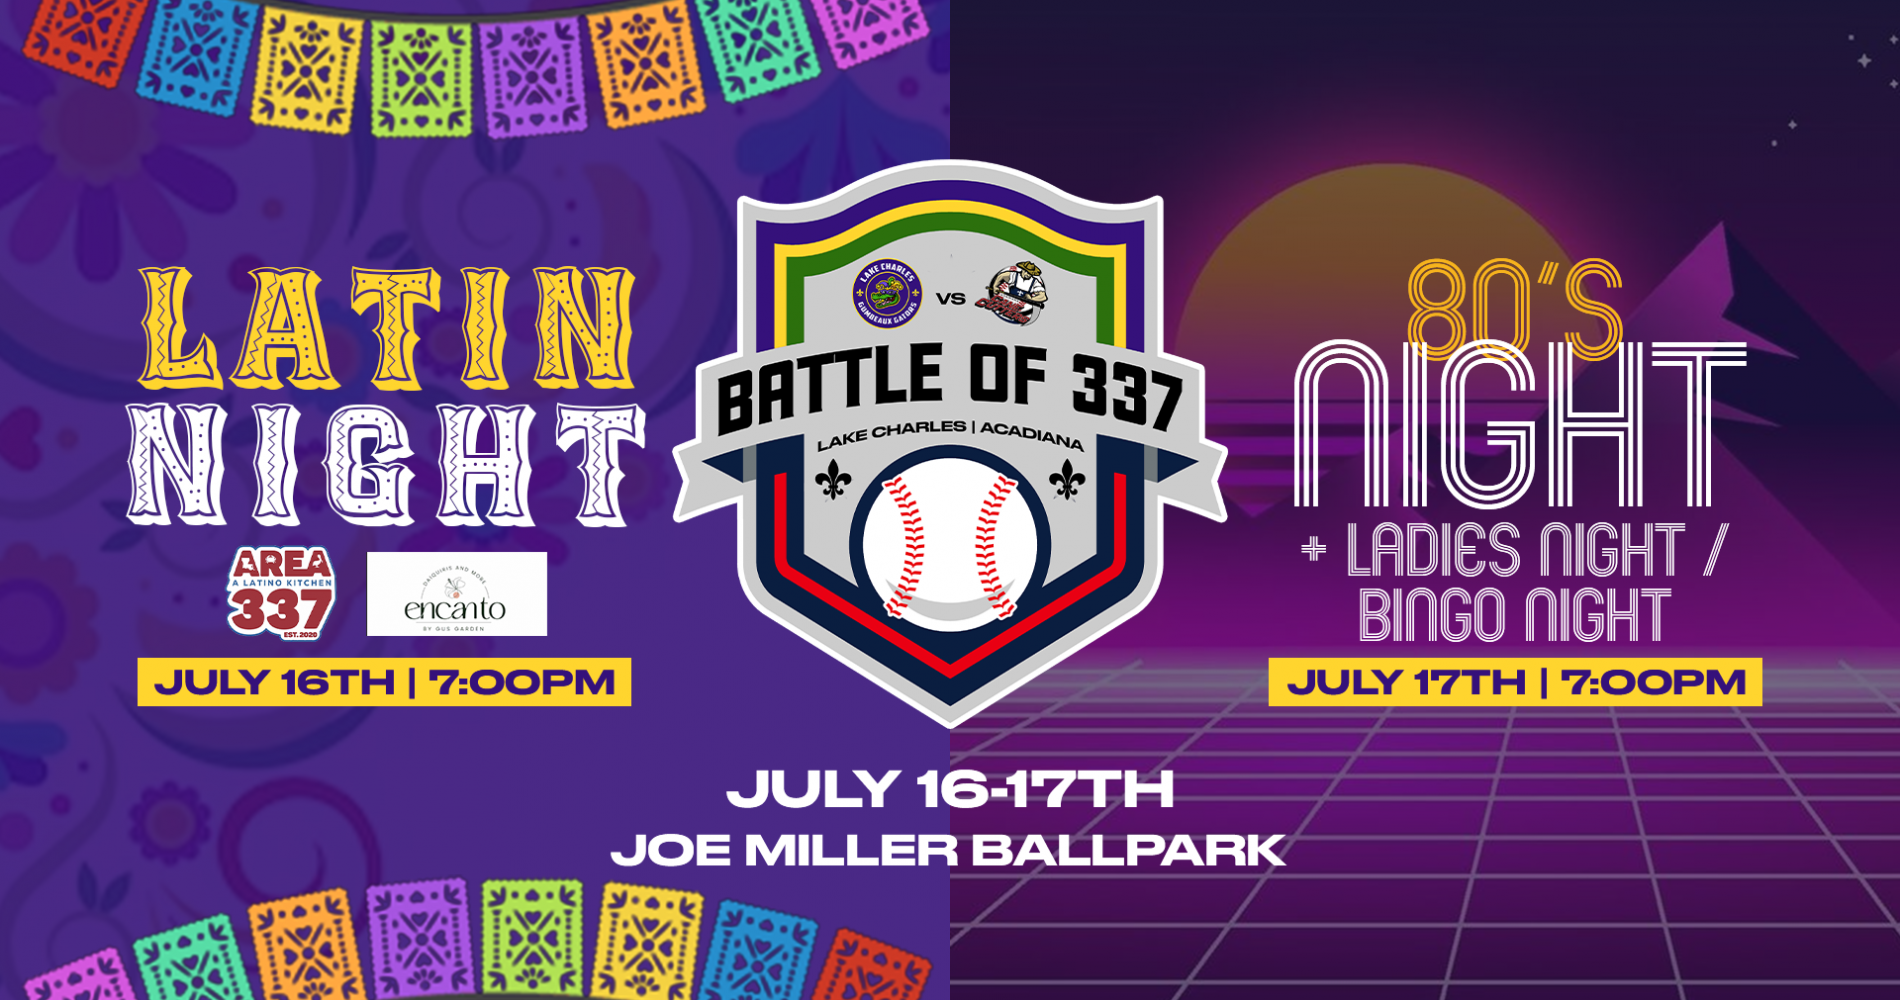 Battle of 337 returns to town this Tuesday and Wednesday, headlined by Latin Night & 80’s Night